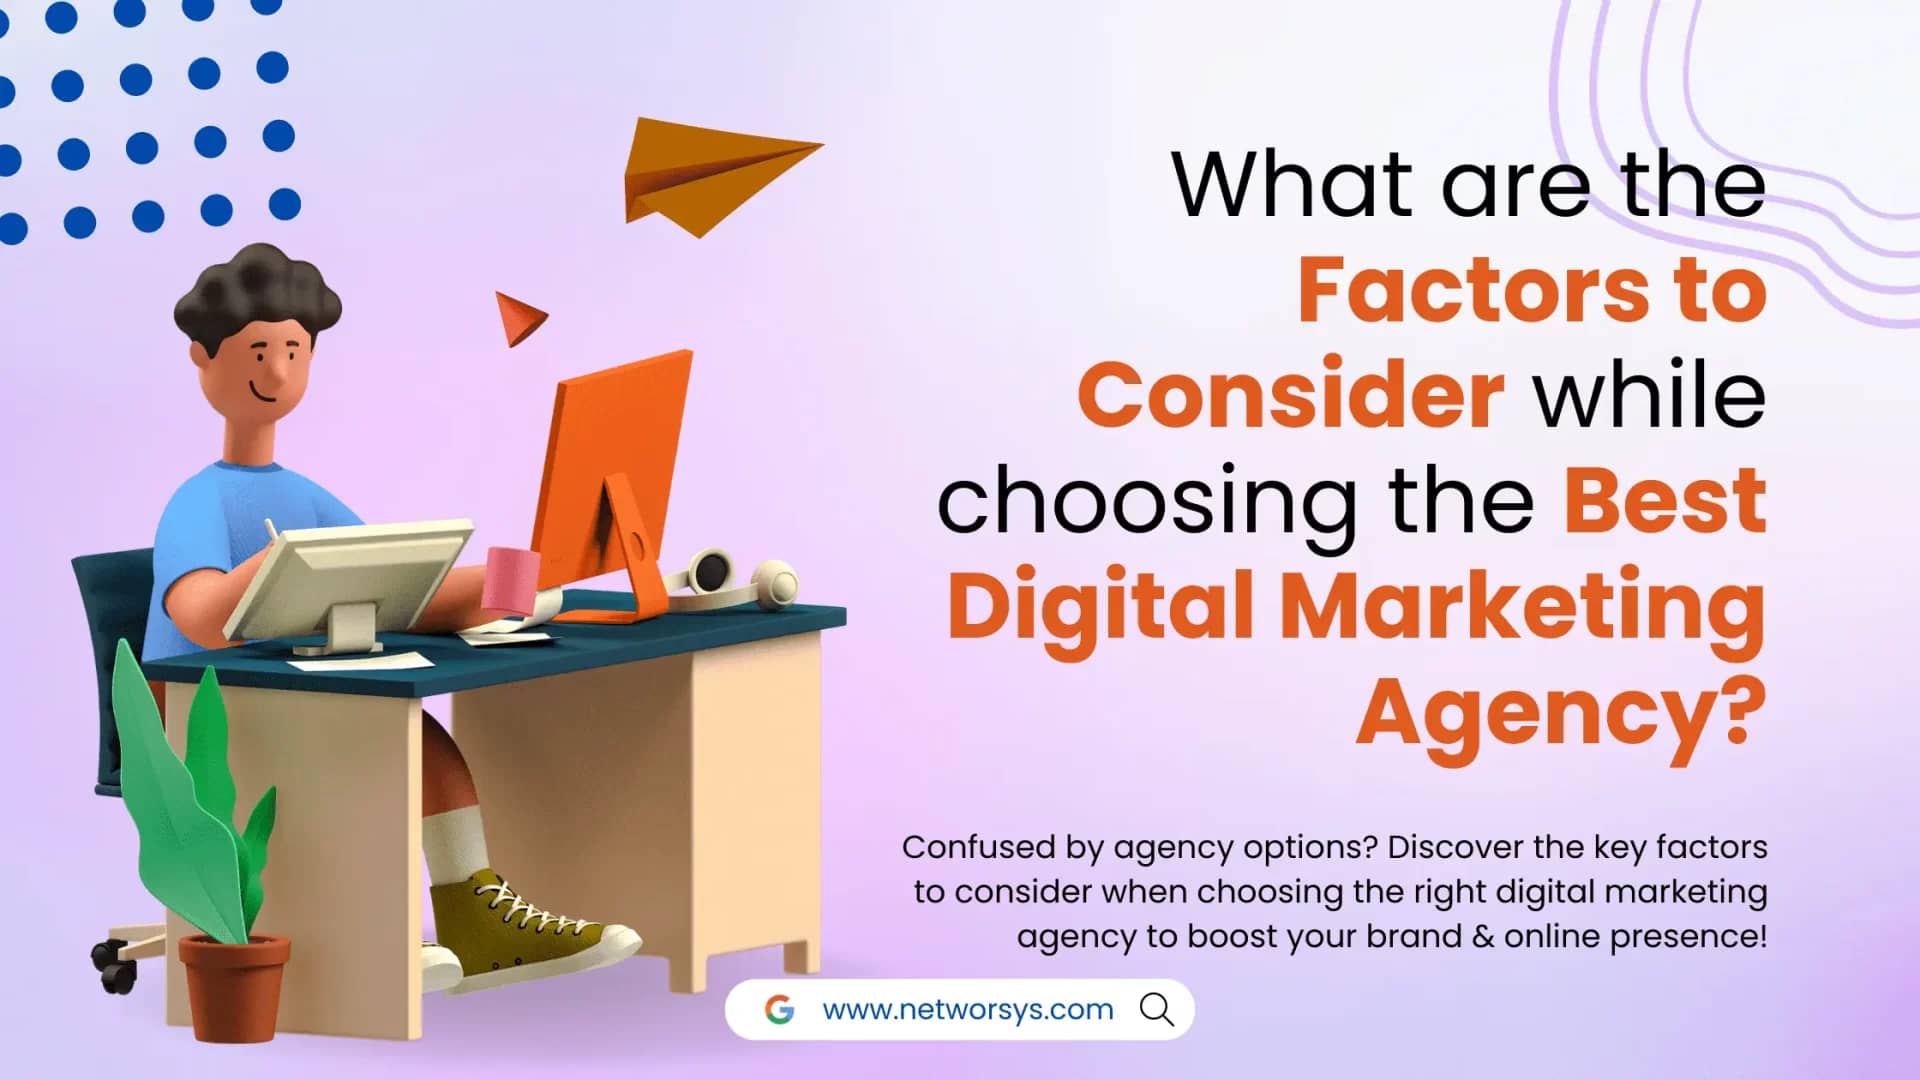 What are the Factors to Consider while choosing the Best Digital Marketing Agency?